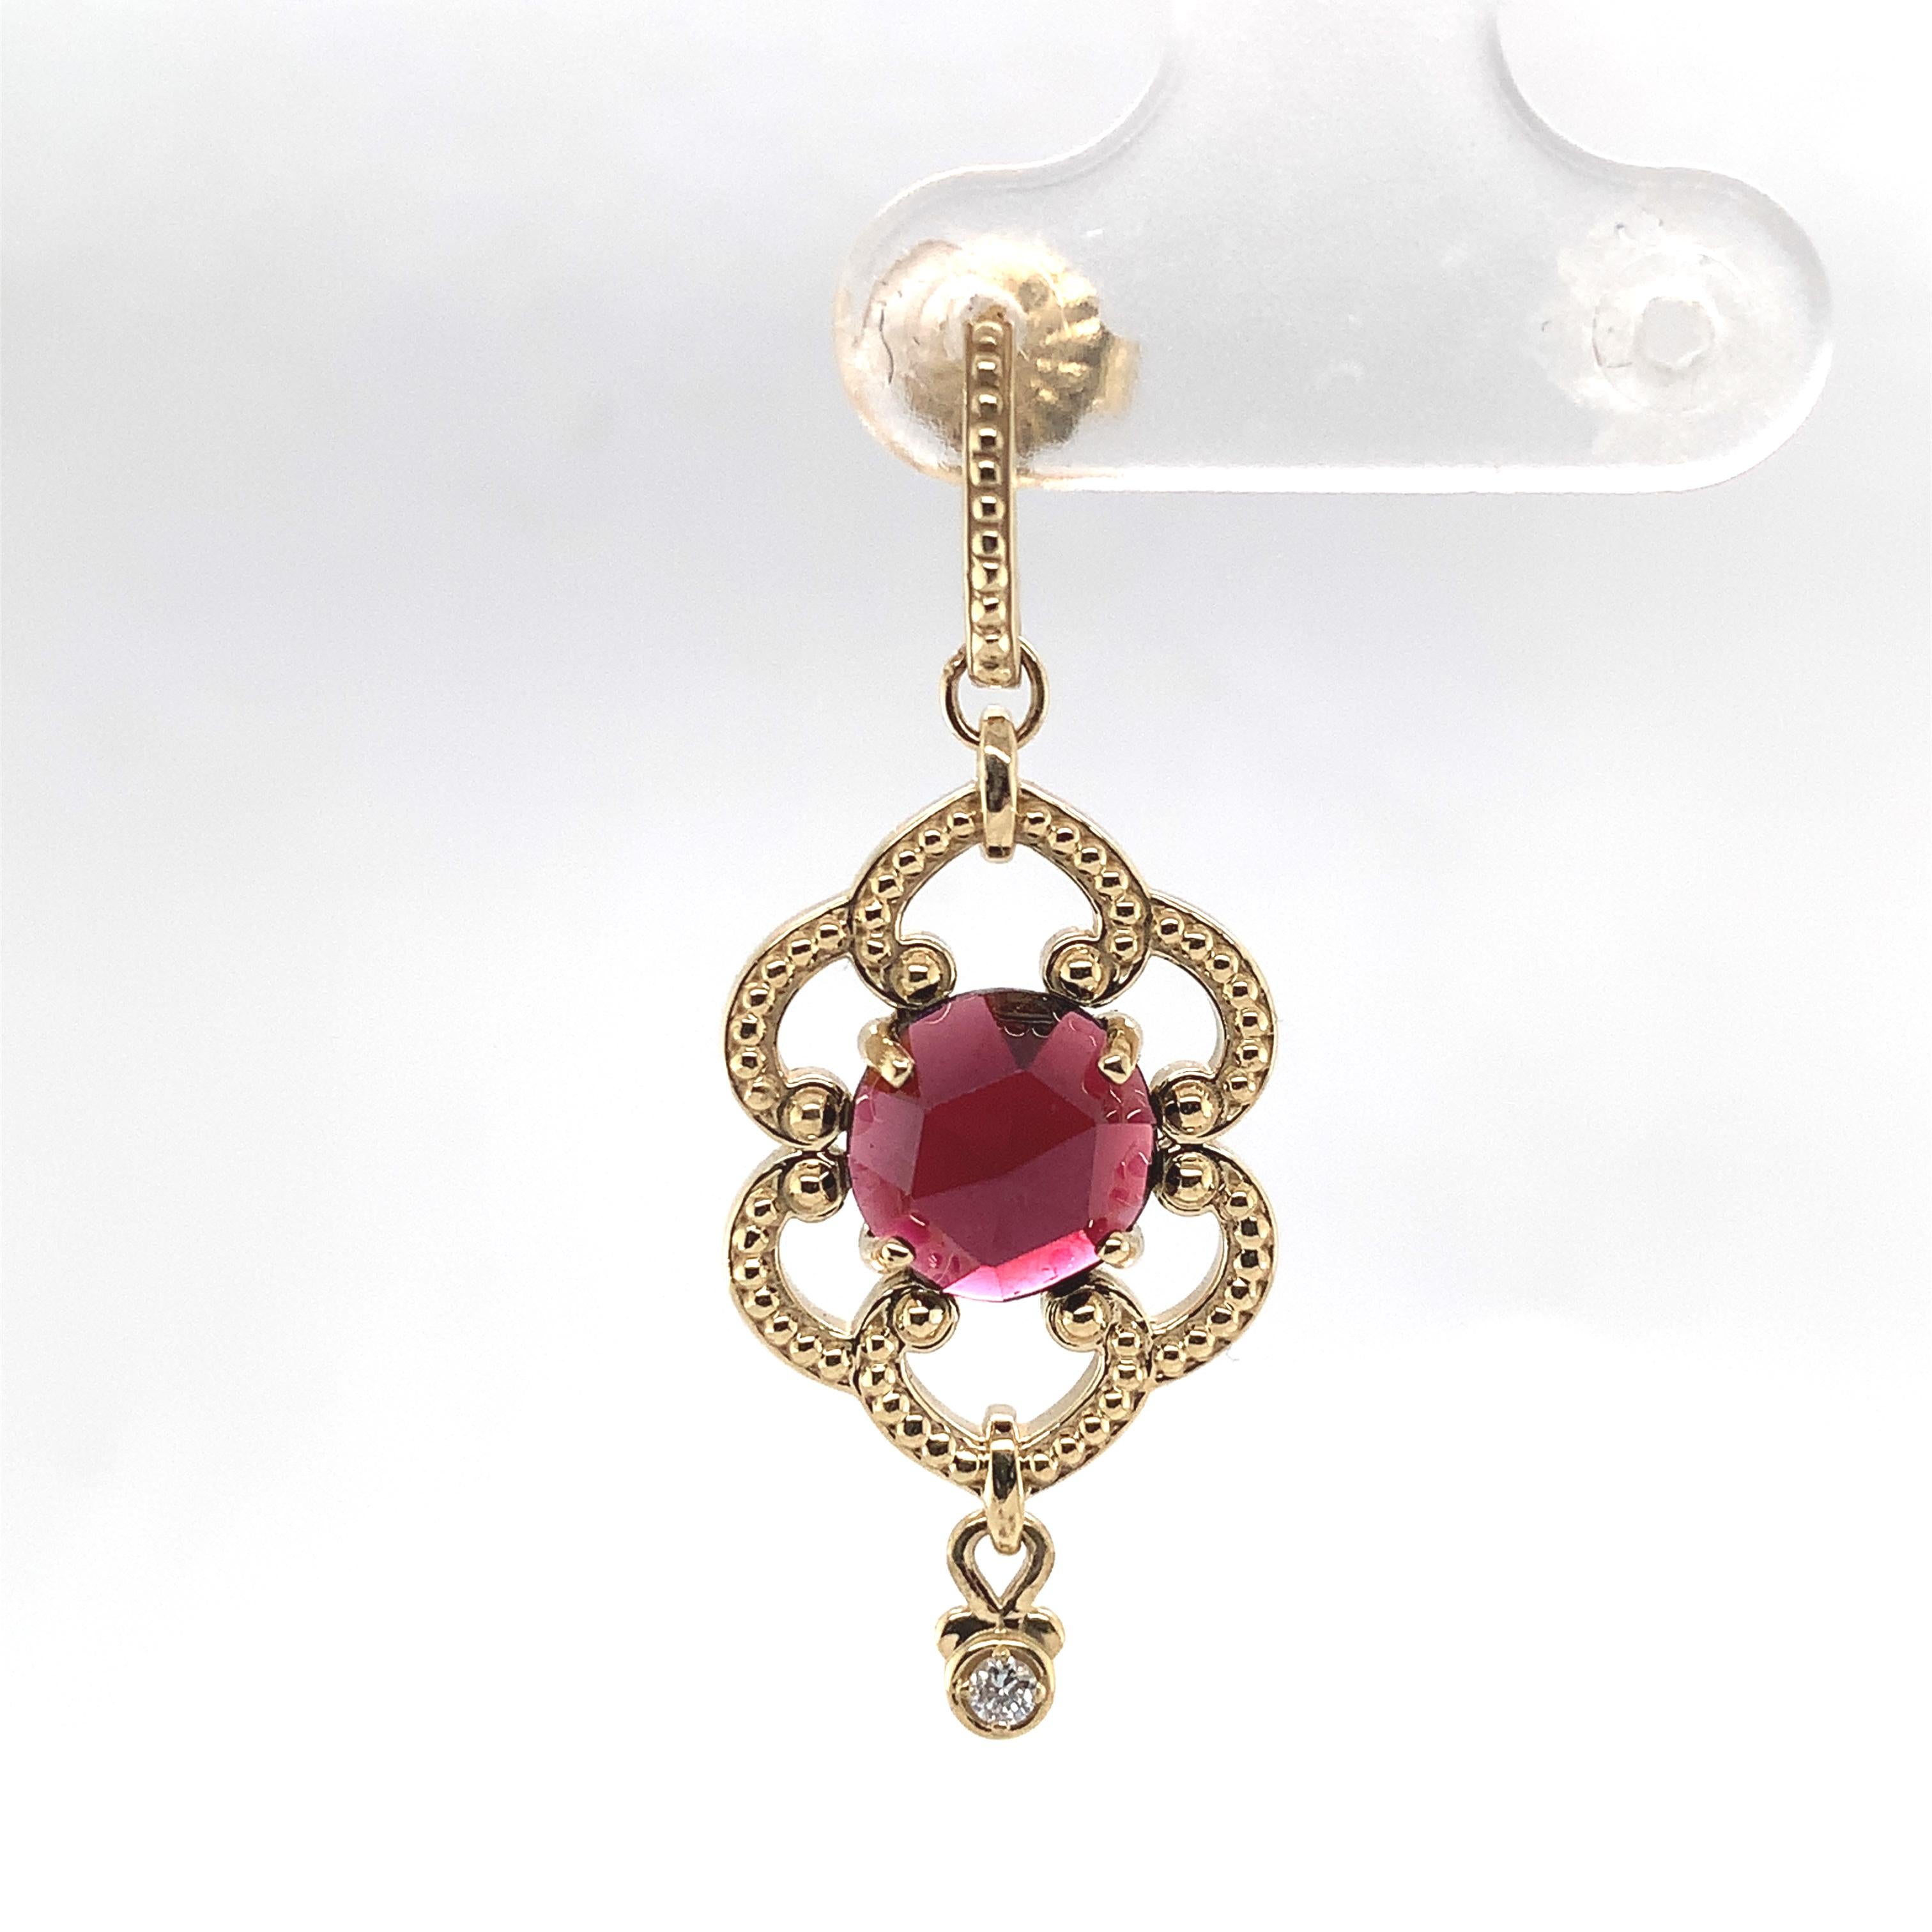 A pair of 14K yellow gold earrings featuring a pair of round rose cut garnets weighing 5.12 carats total. The red garnets measure 7mm. Beautiful scroll work and a tiny round diamond dangle accent measuring about 1.5mm. The earrings measure 1 1/2